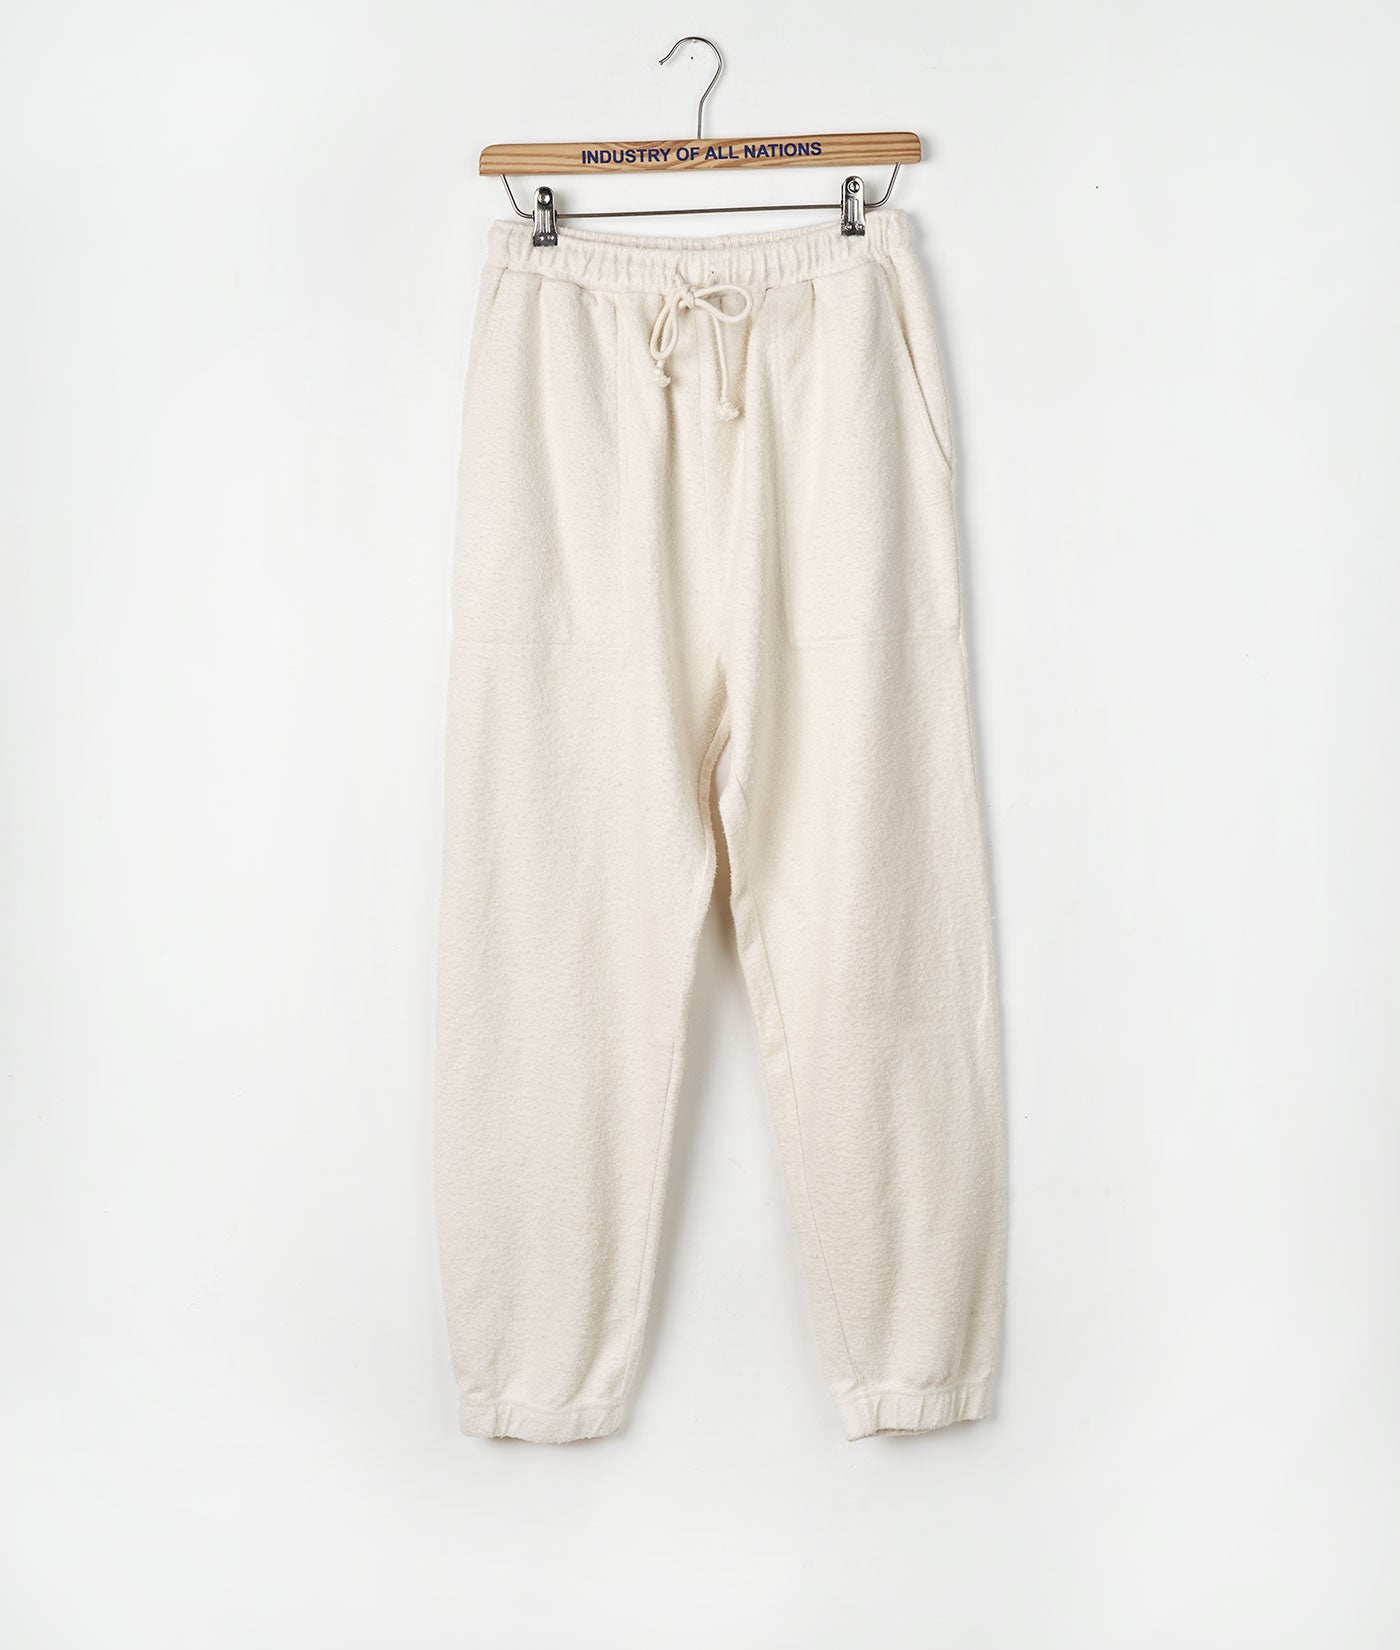 Industry of All Nations Organic Cotton Fleece SweatpantsIndustry of All Nations Organic Cotton Fleece Sweatpants Undyed